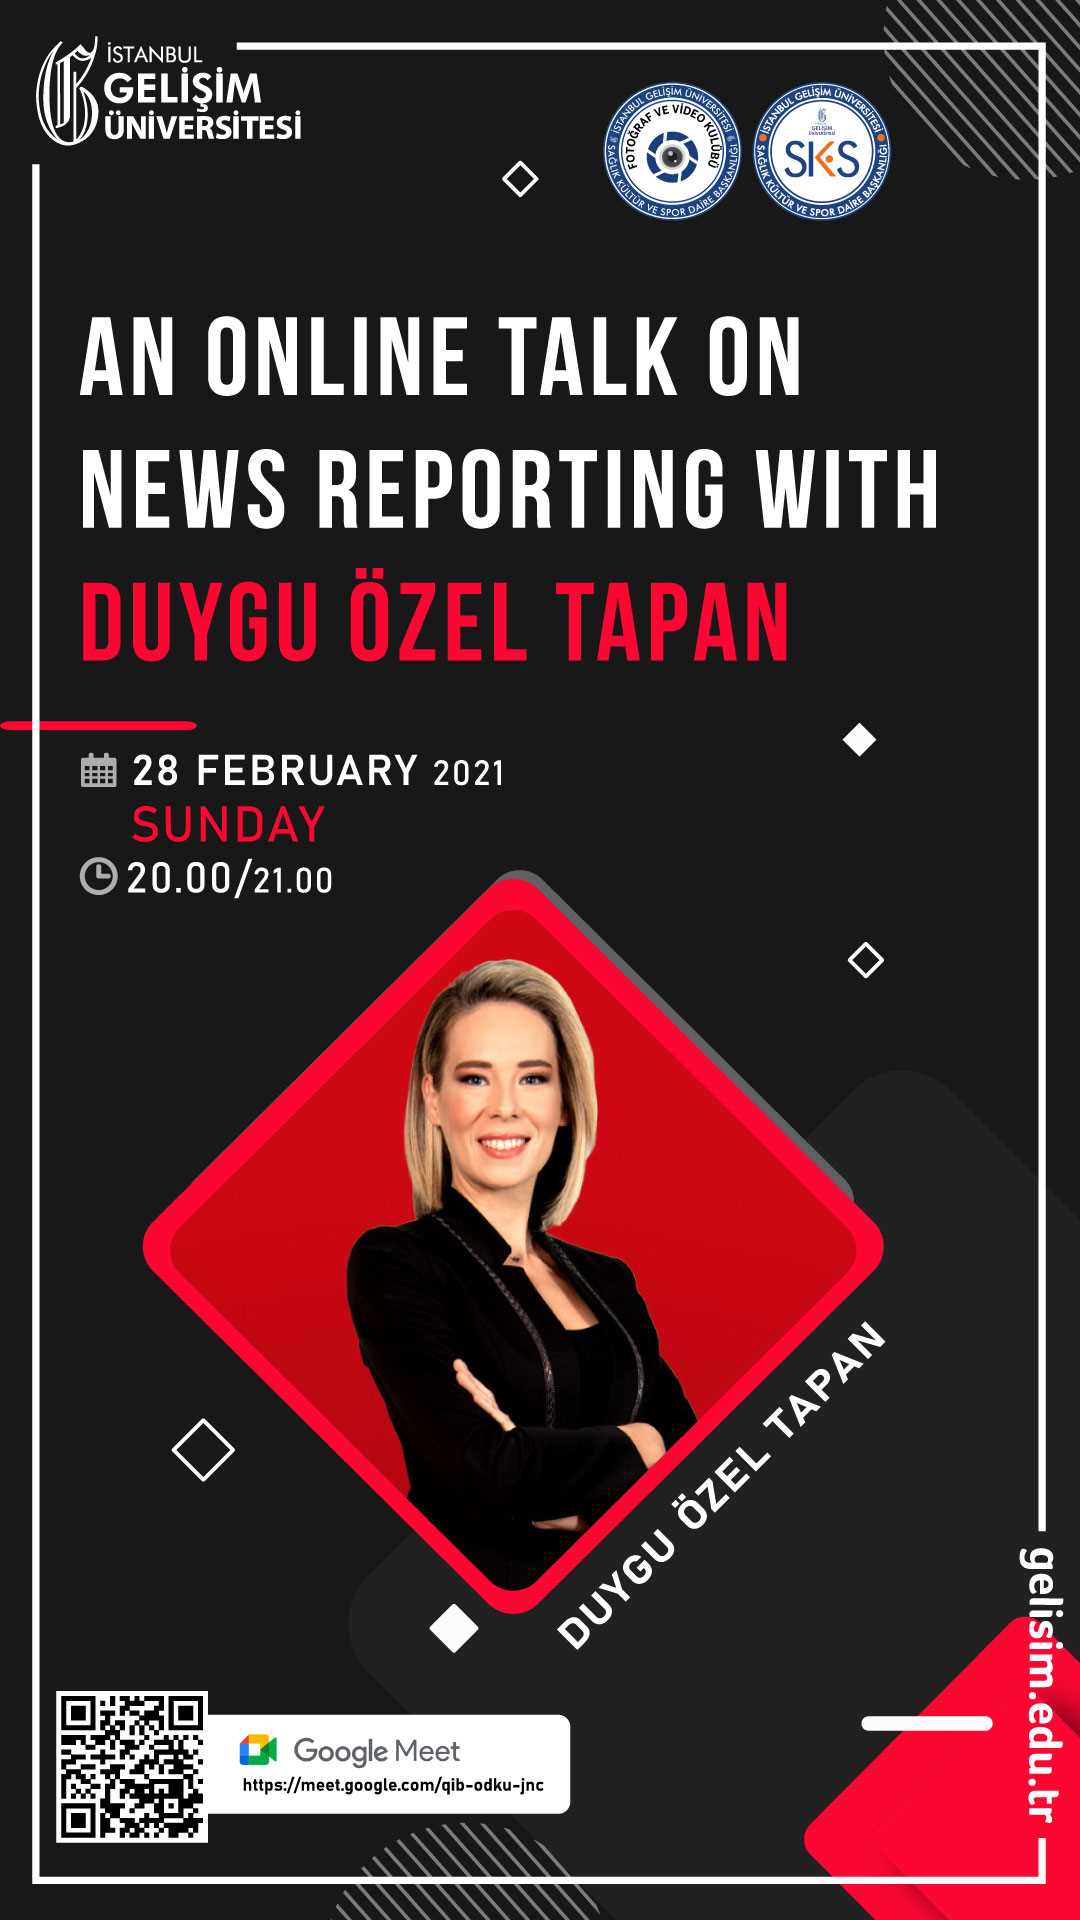 An Online Talk on News Reporting with Duygu Özel Tapan